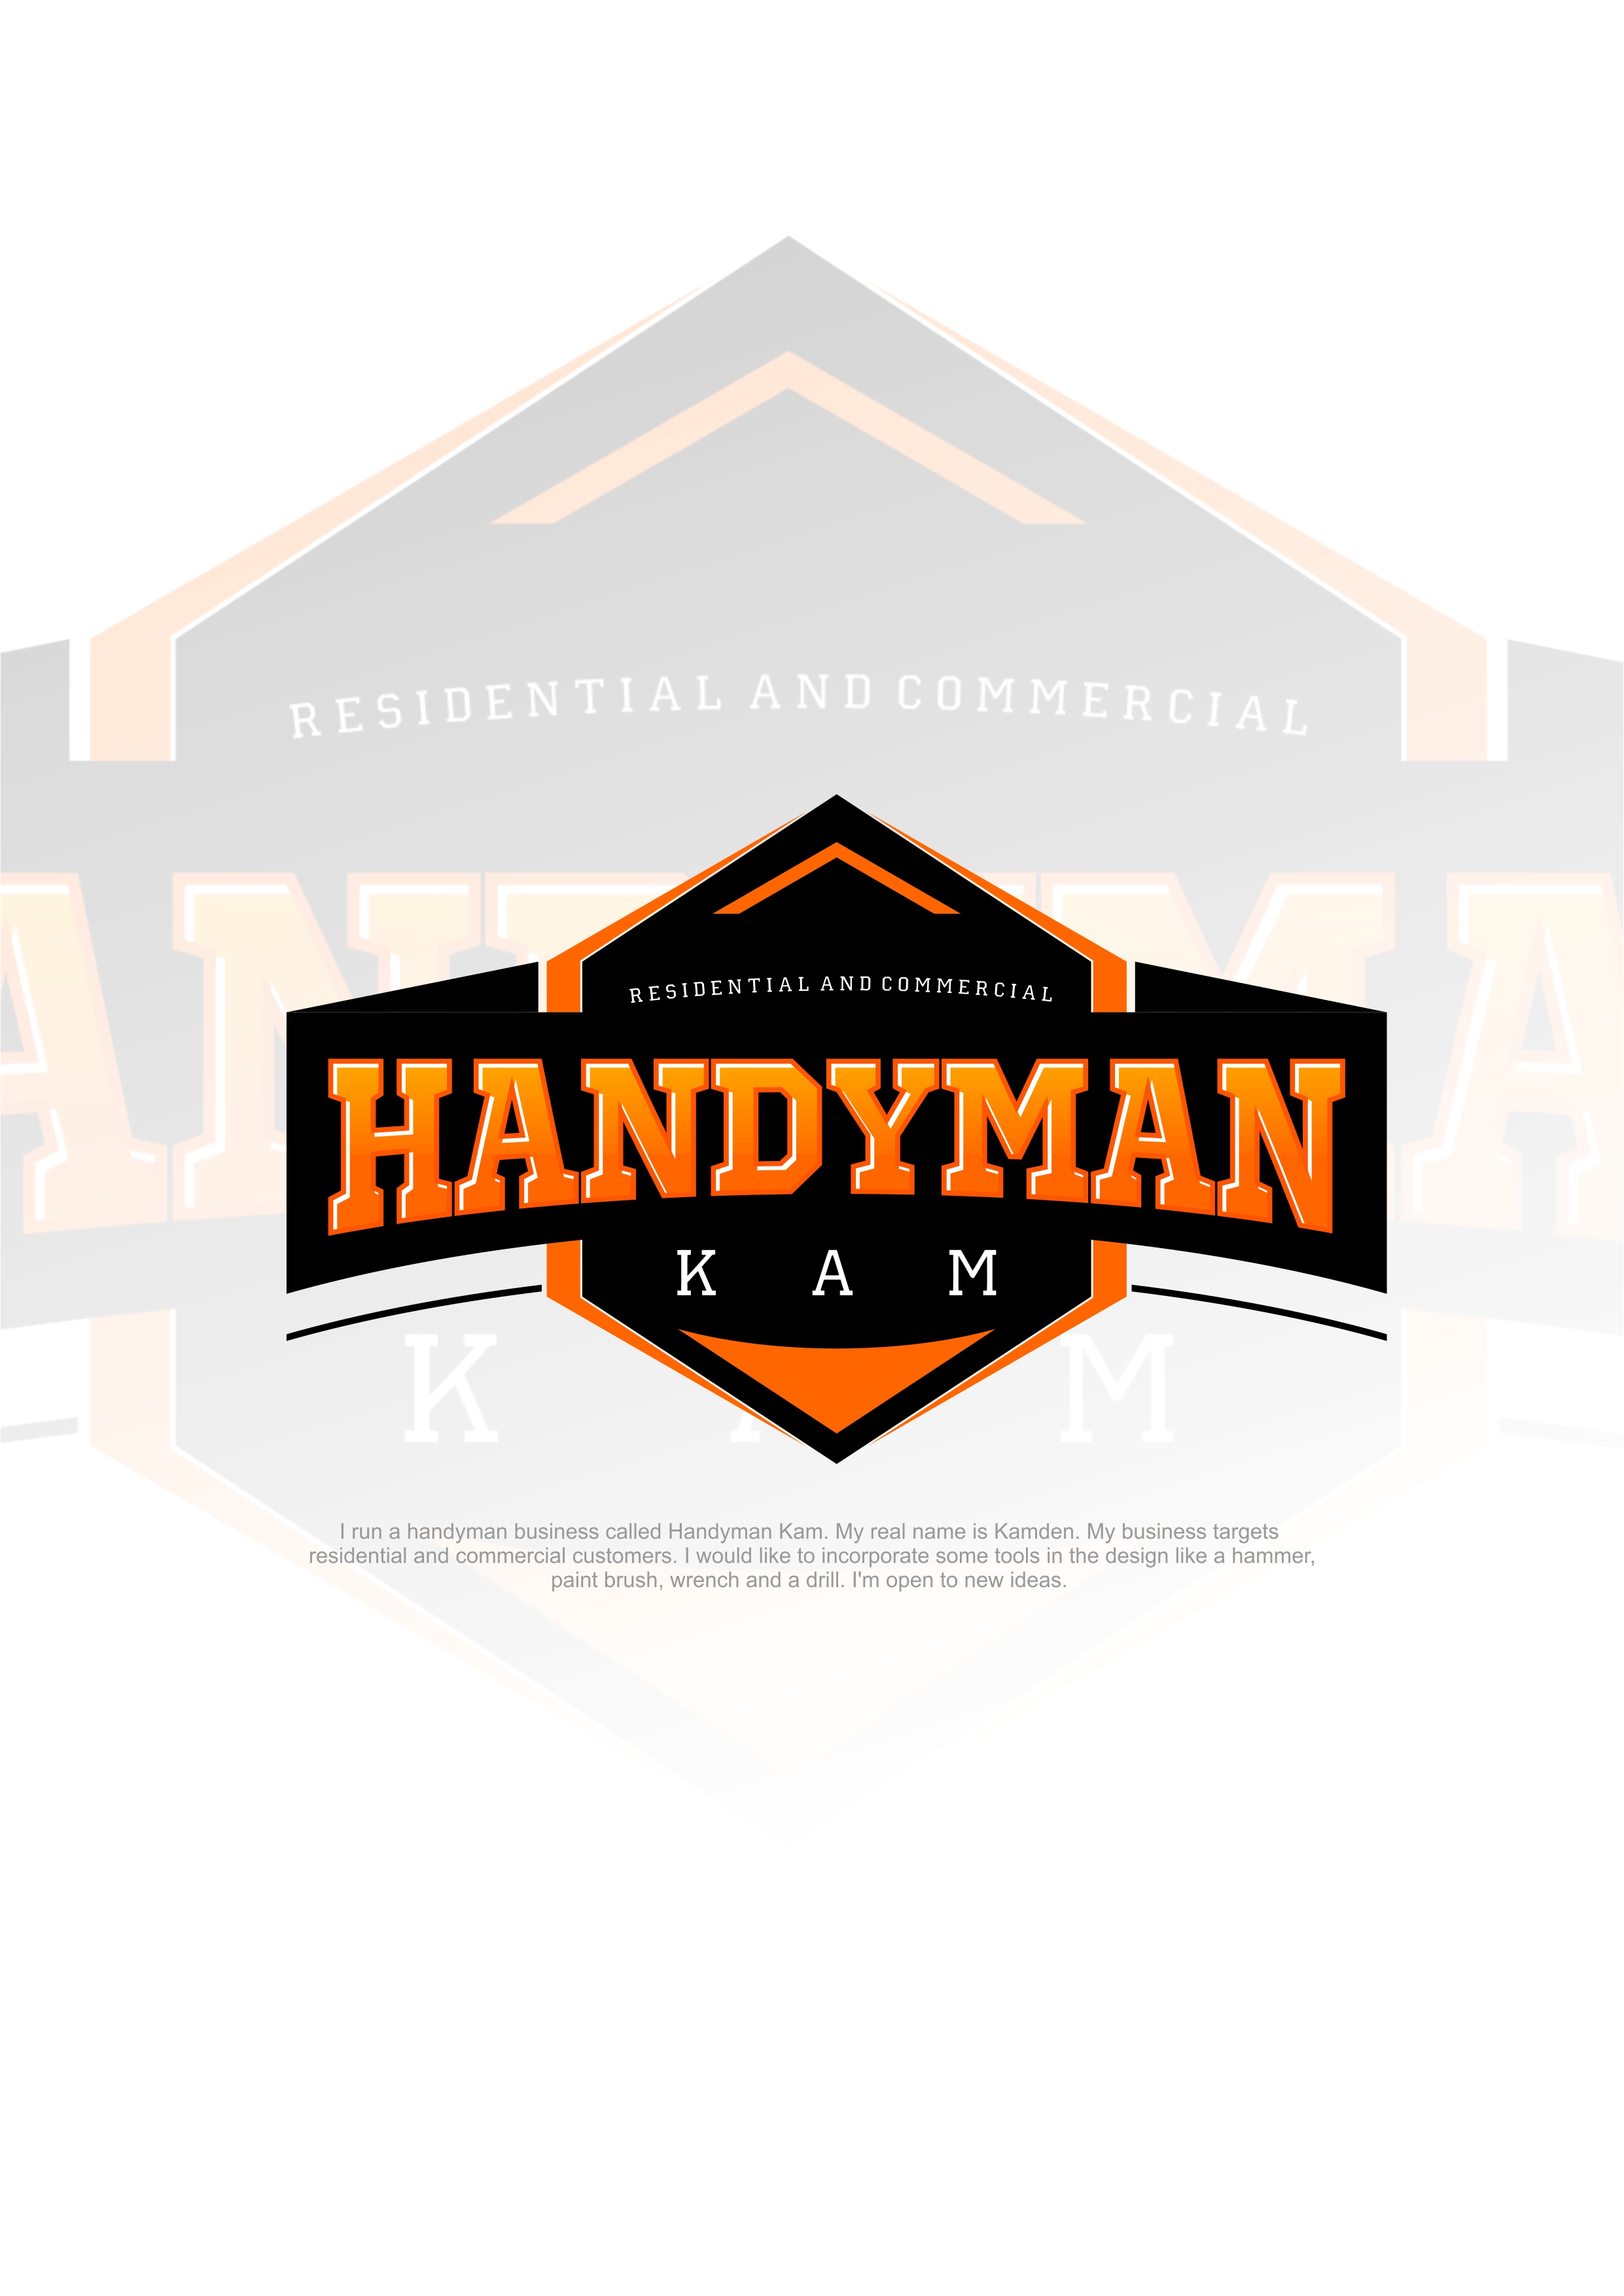 what qualifications do you need to be a handyman